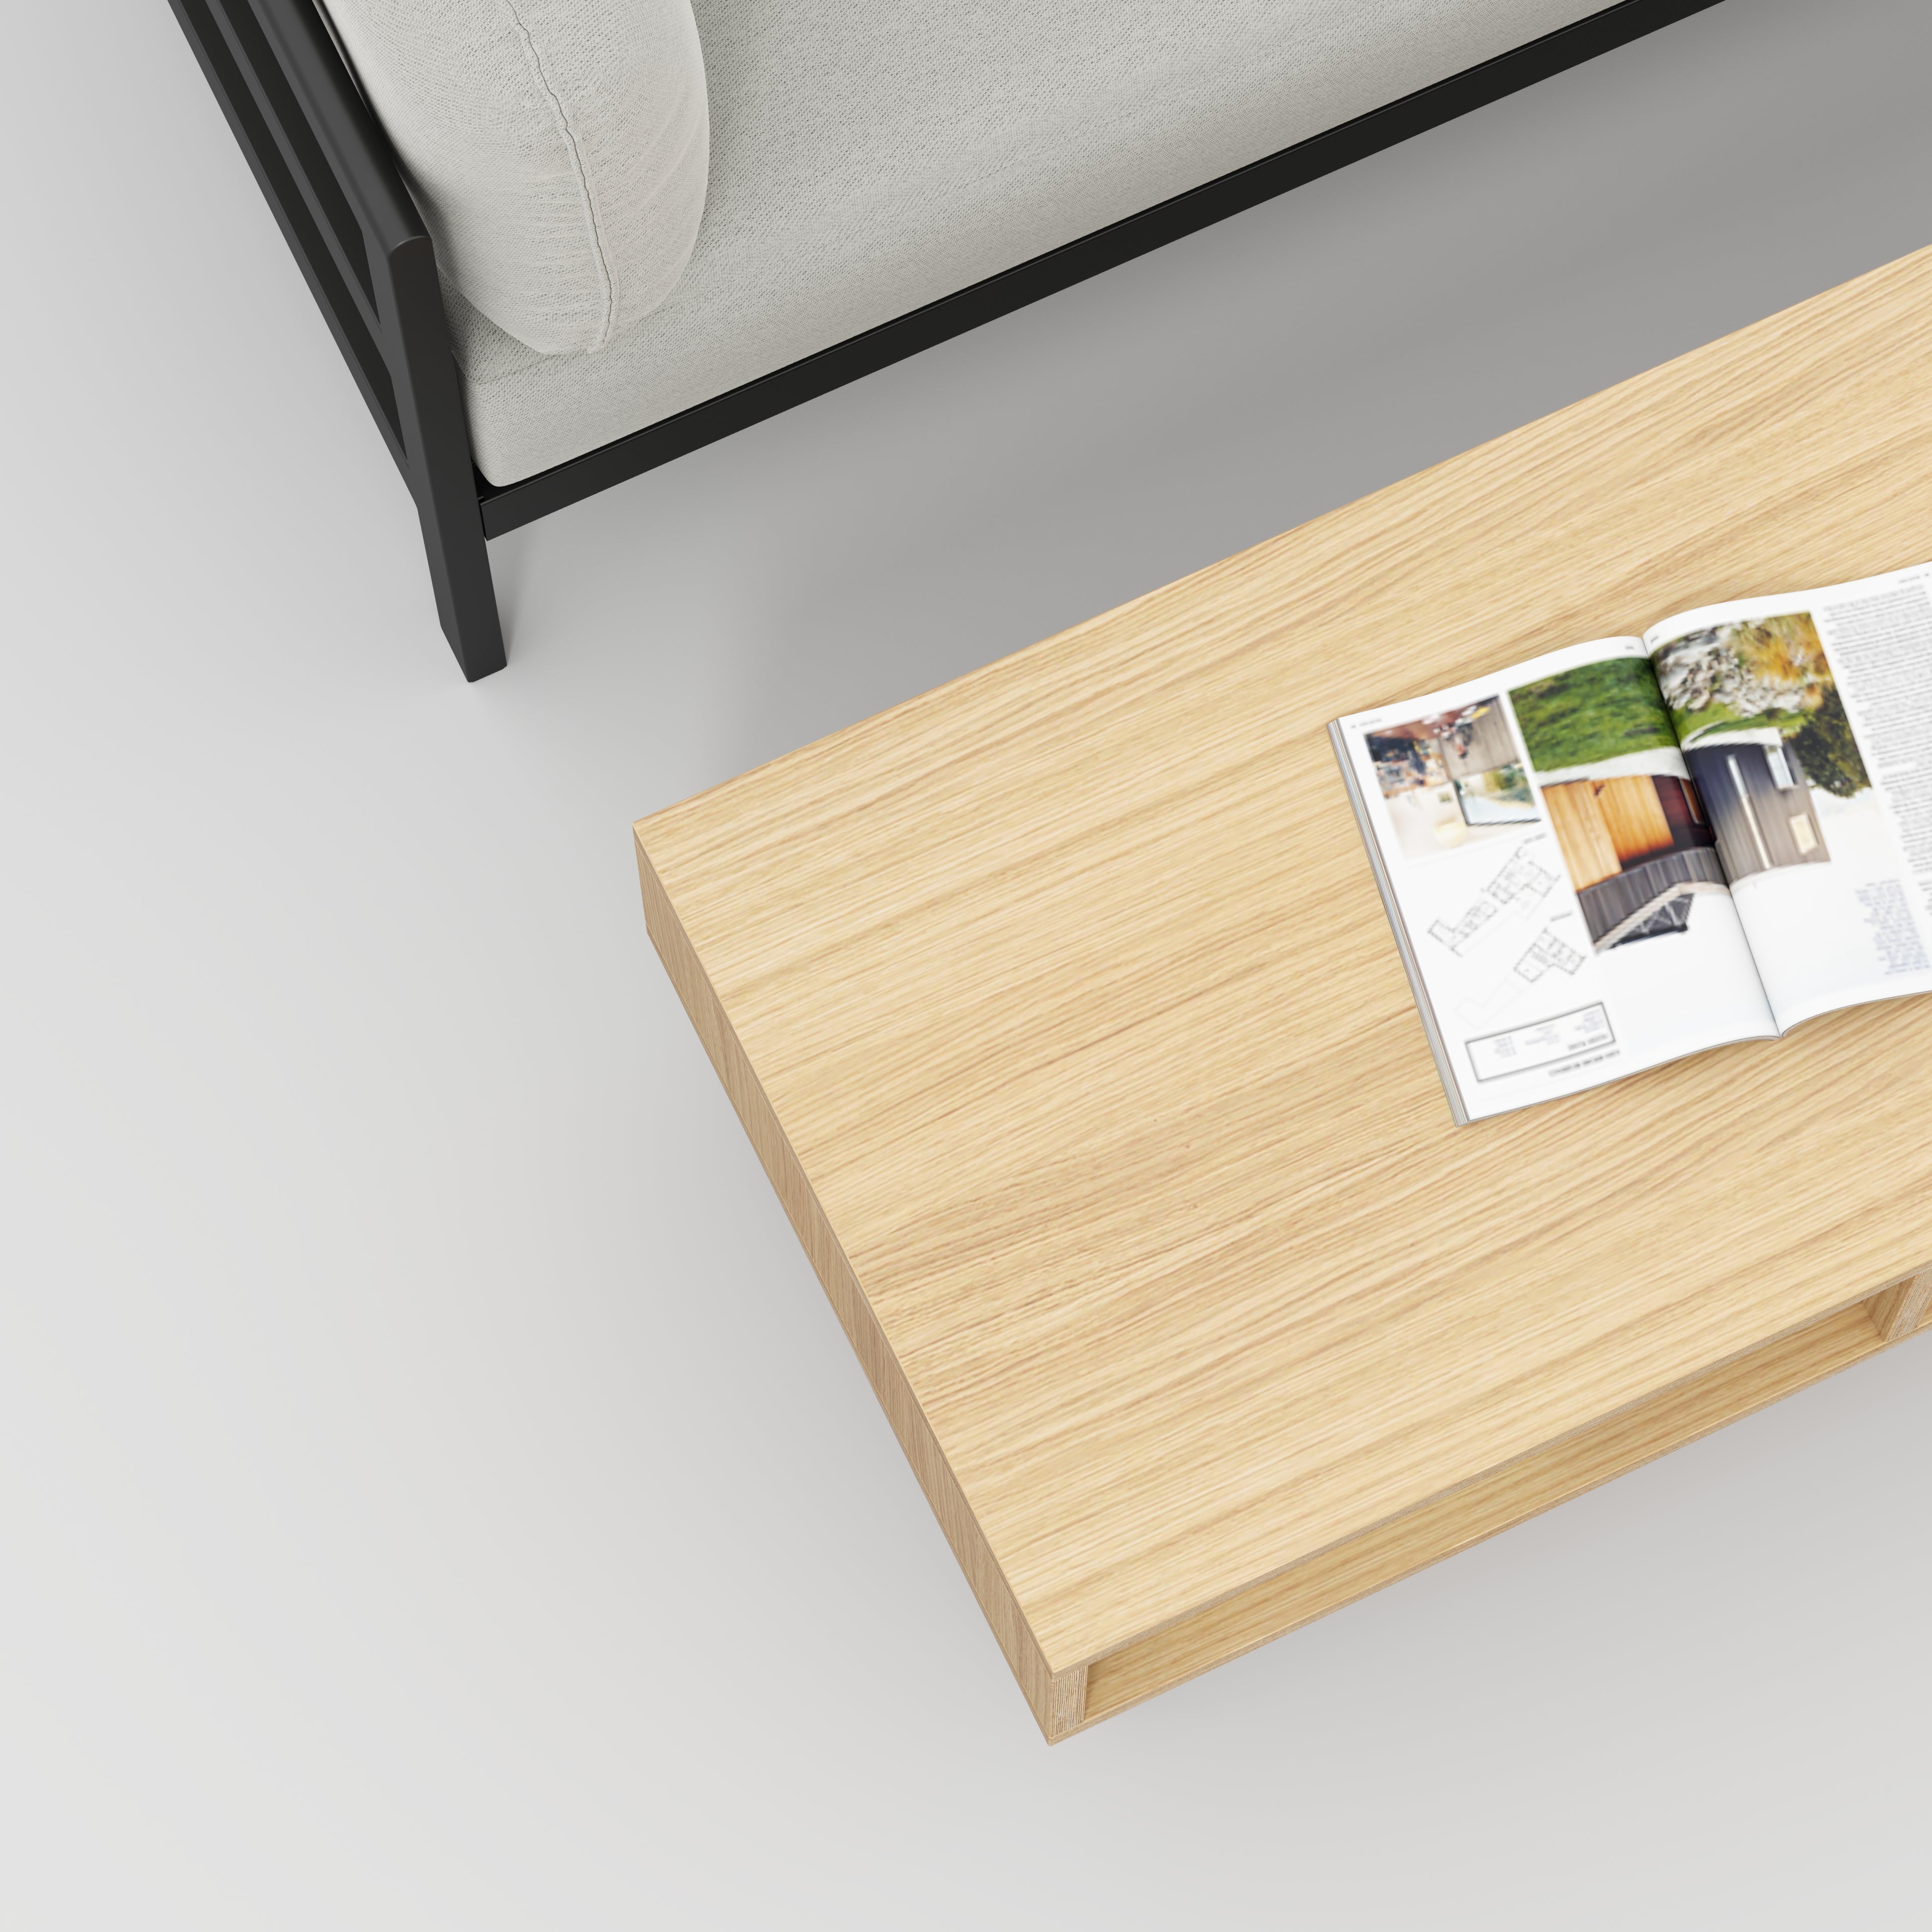 Coffee Table with Box Storage and Black Hairpin Legs - Plywood Oak - 1200(w) x 600(d) x 400(h)